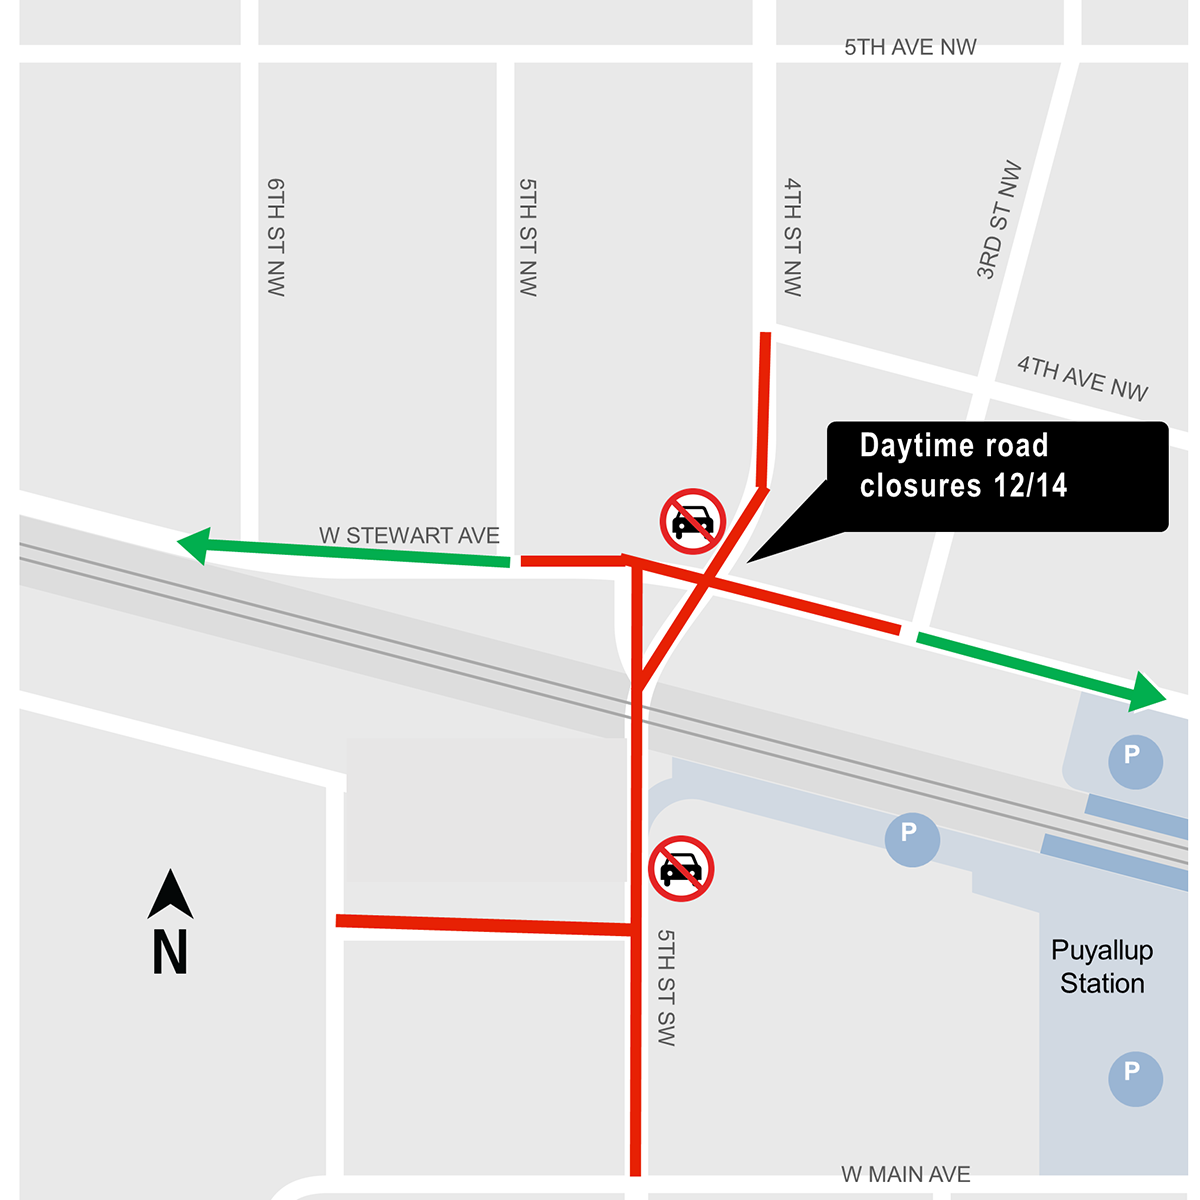 construction impacts map for daytime closure of 4th St. NW and W Stewart Ave. intersection